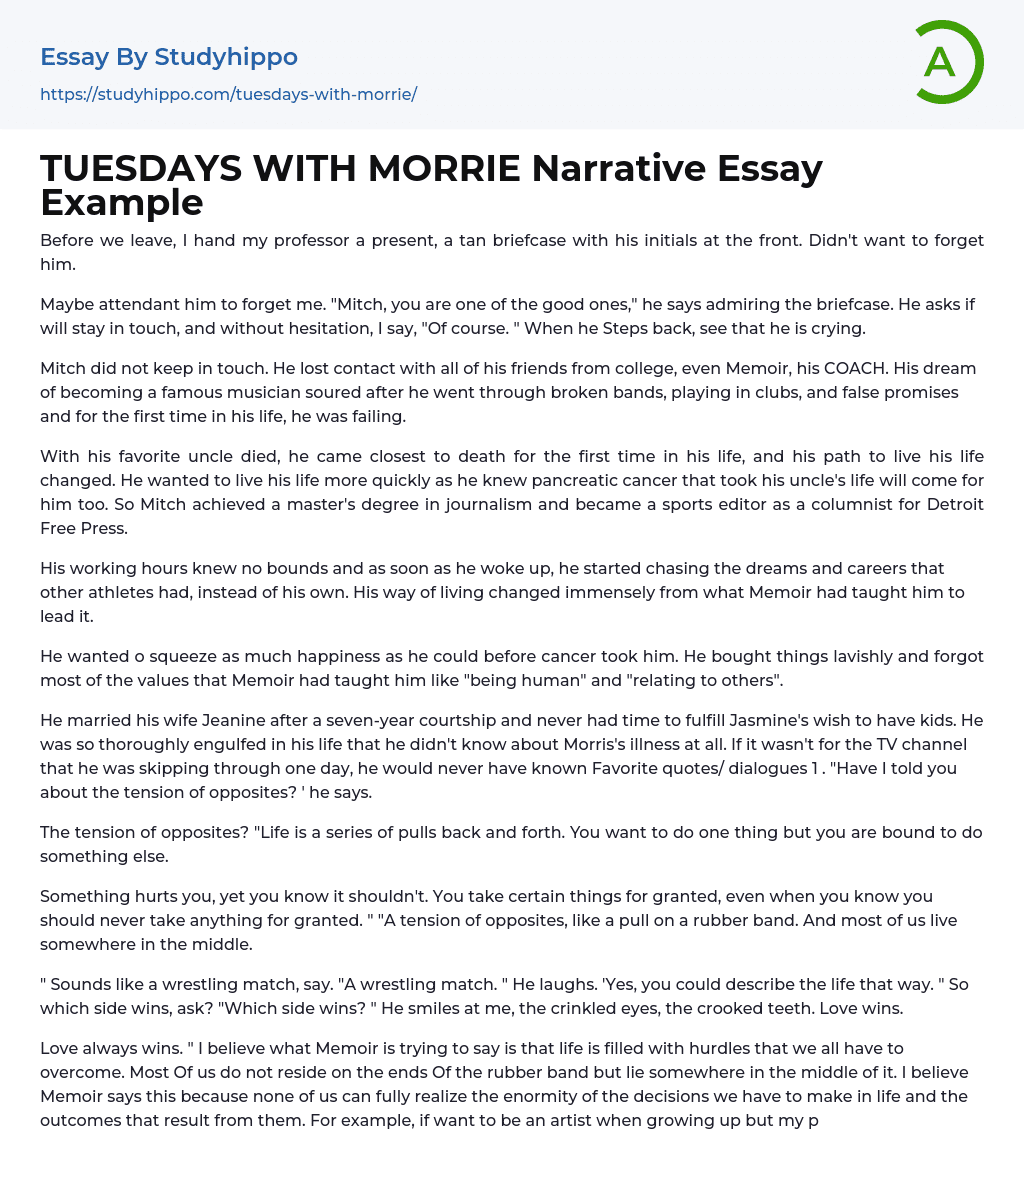 TUESDAYS WITH MORRIE Narrative Essay Example